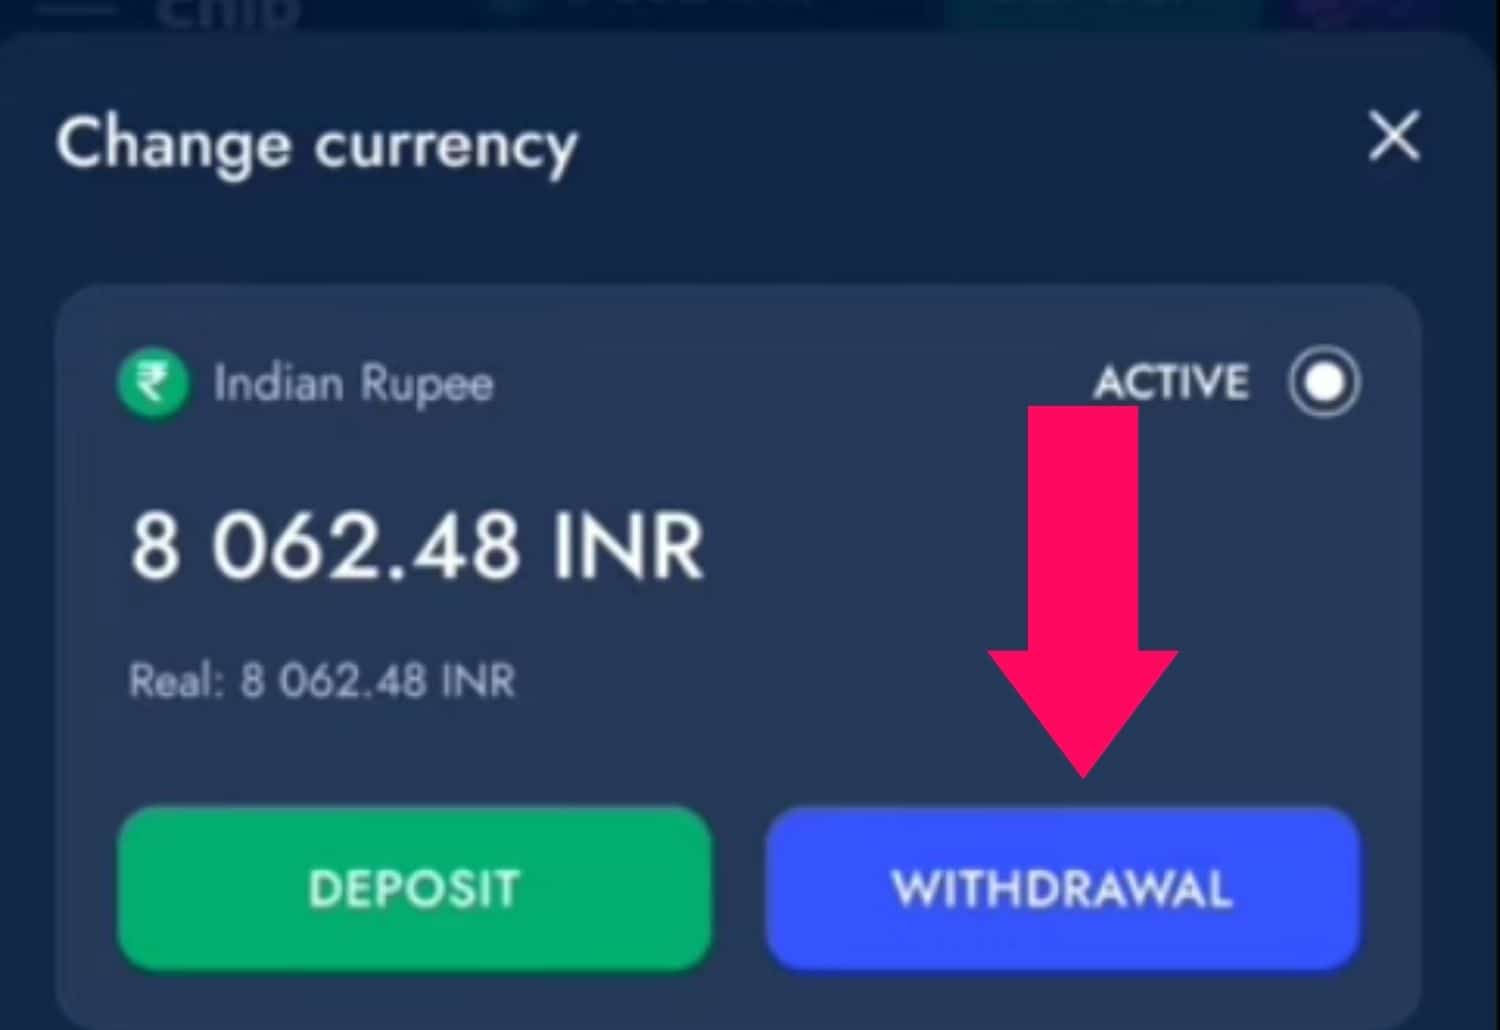 Bluechip Casino India detailed withdrawal instruction